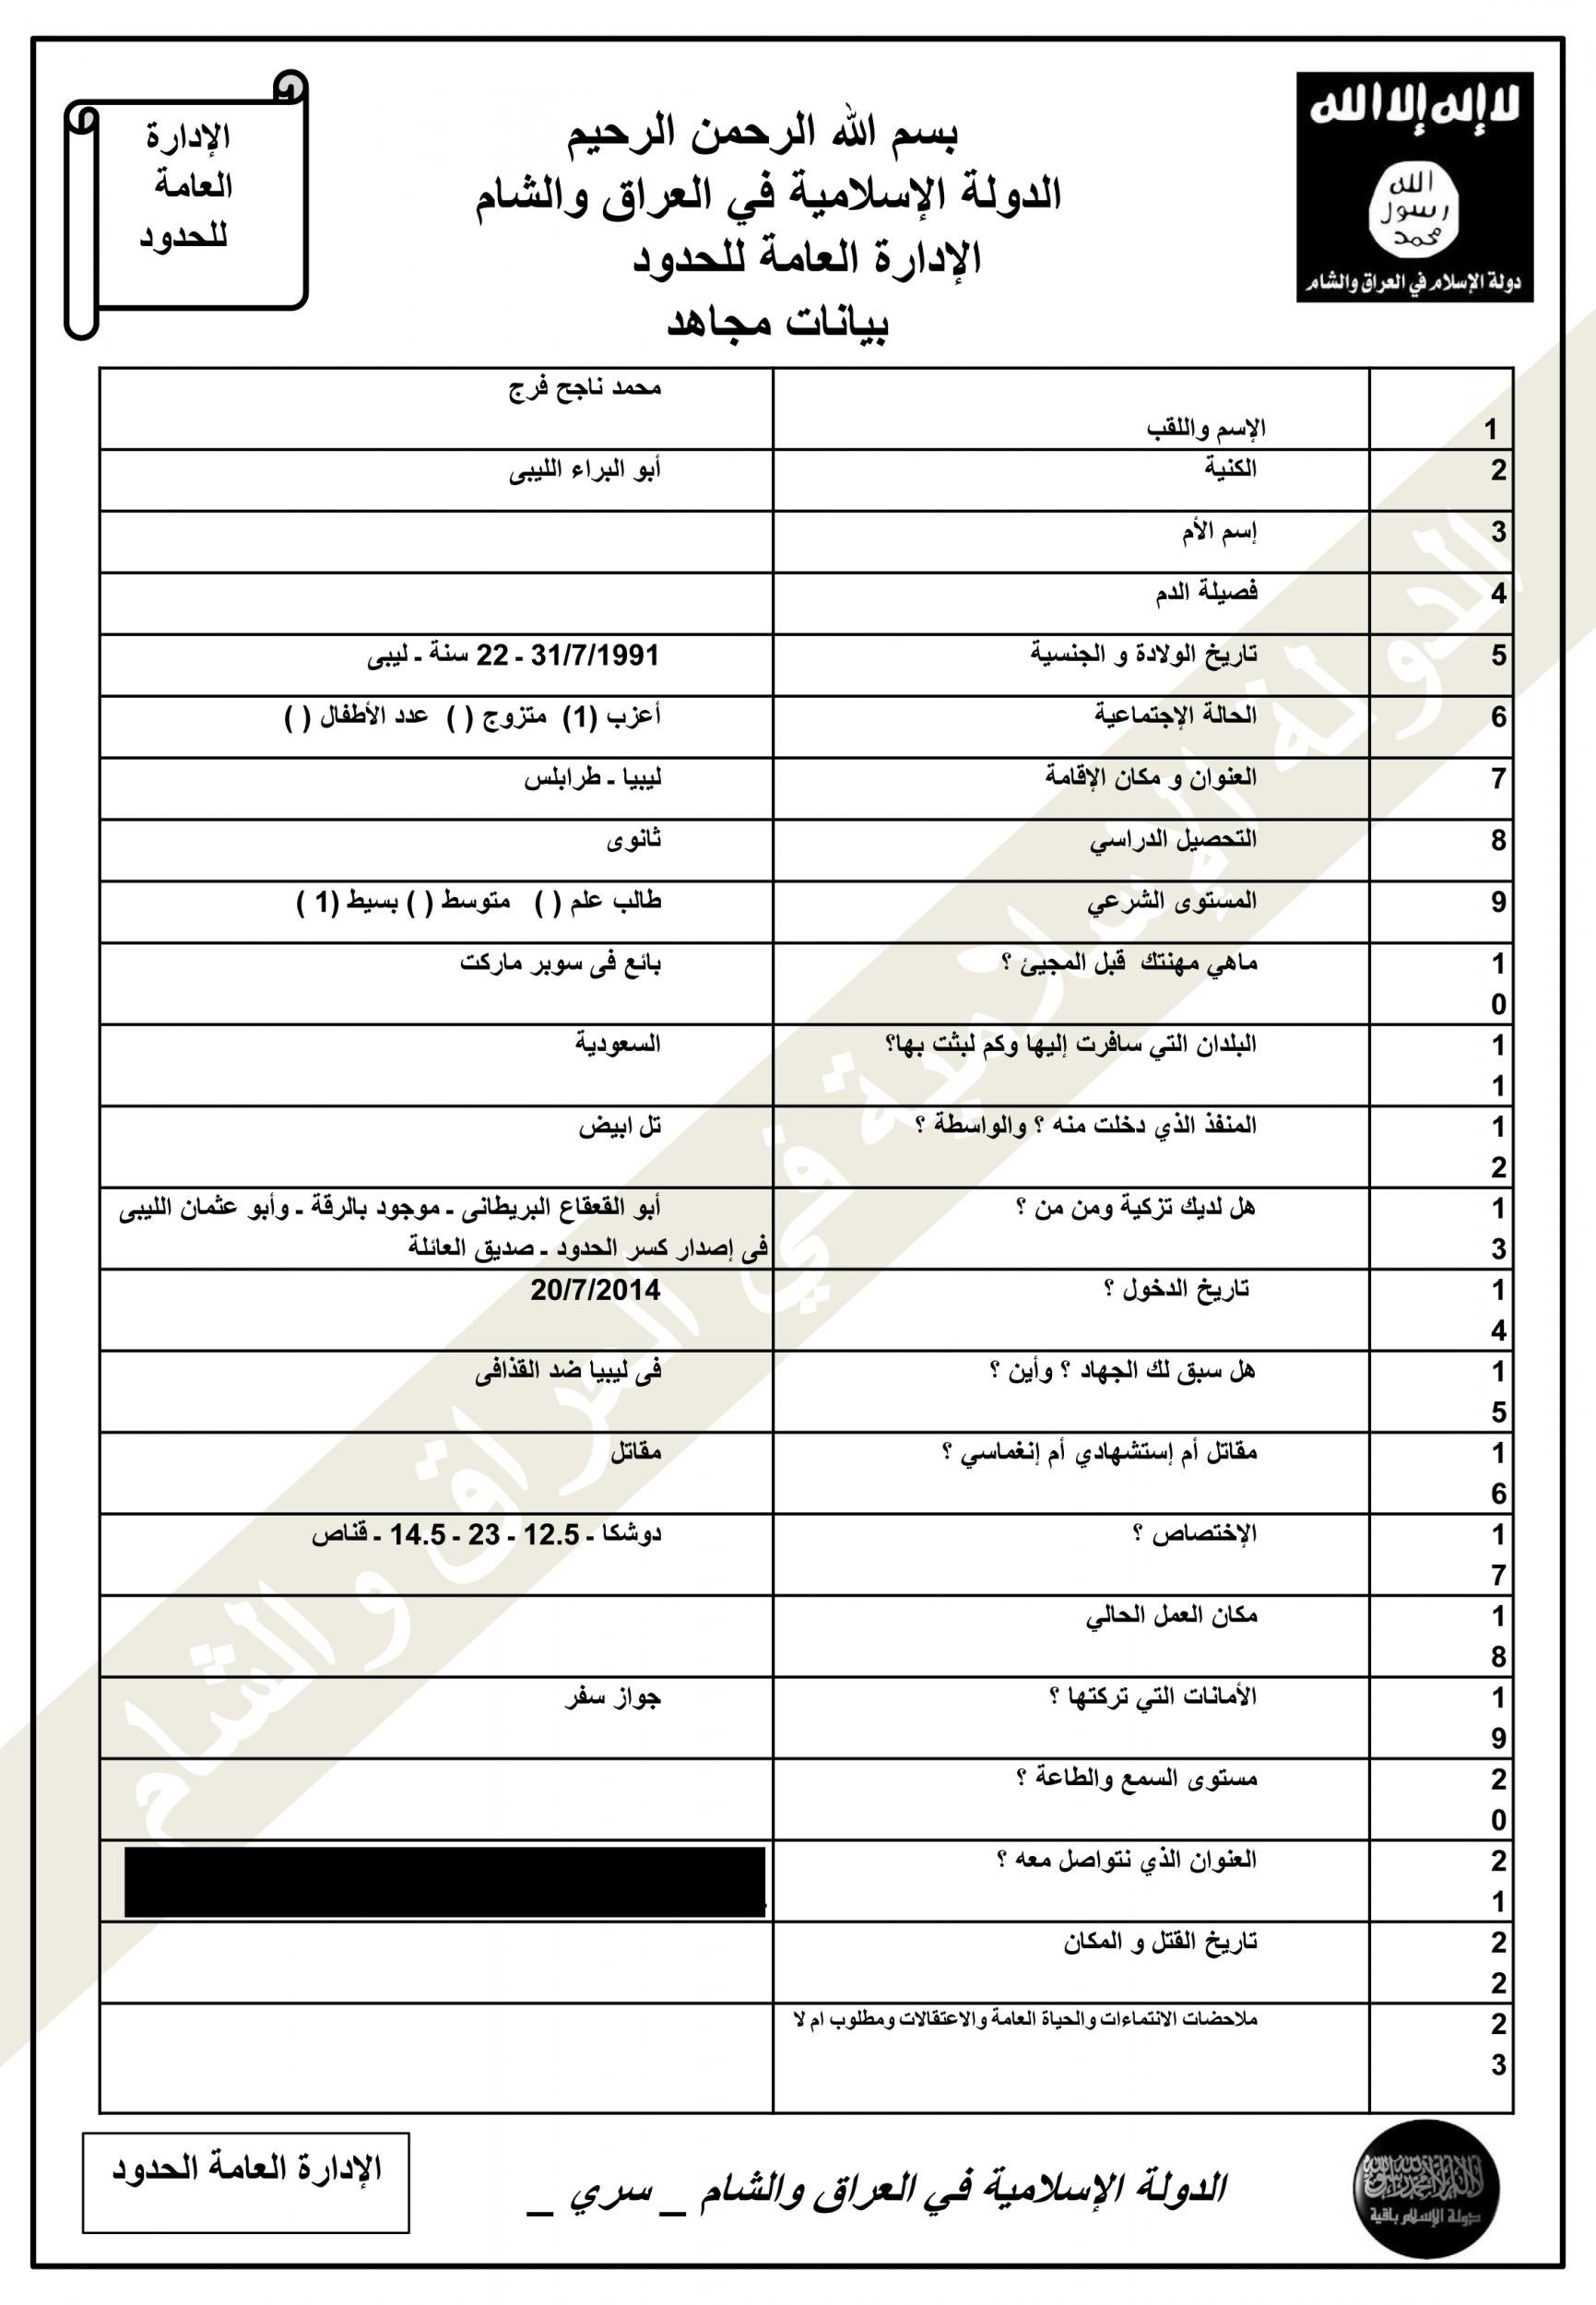 Mohammed Abdallah's Isis registration form, which lists him as a sniper with fighting experience in Libya